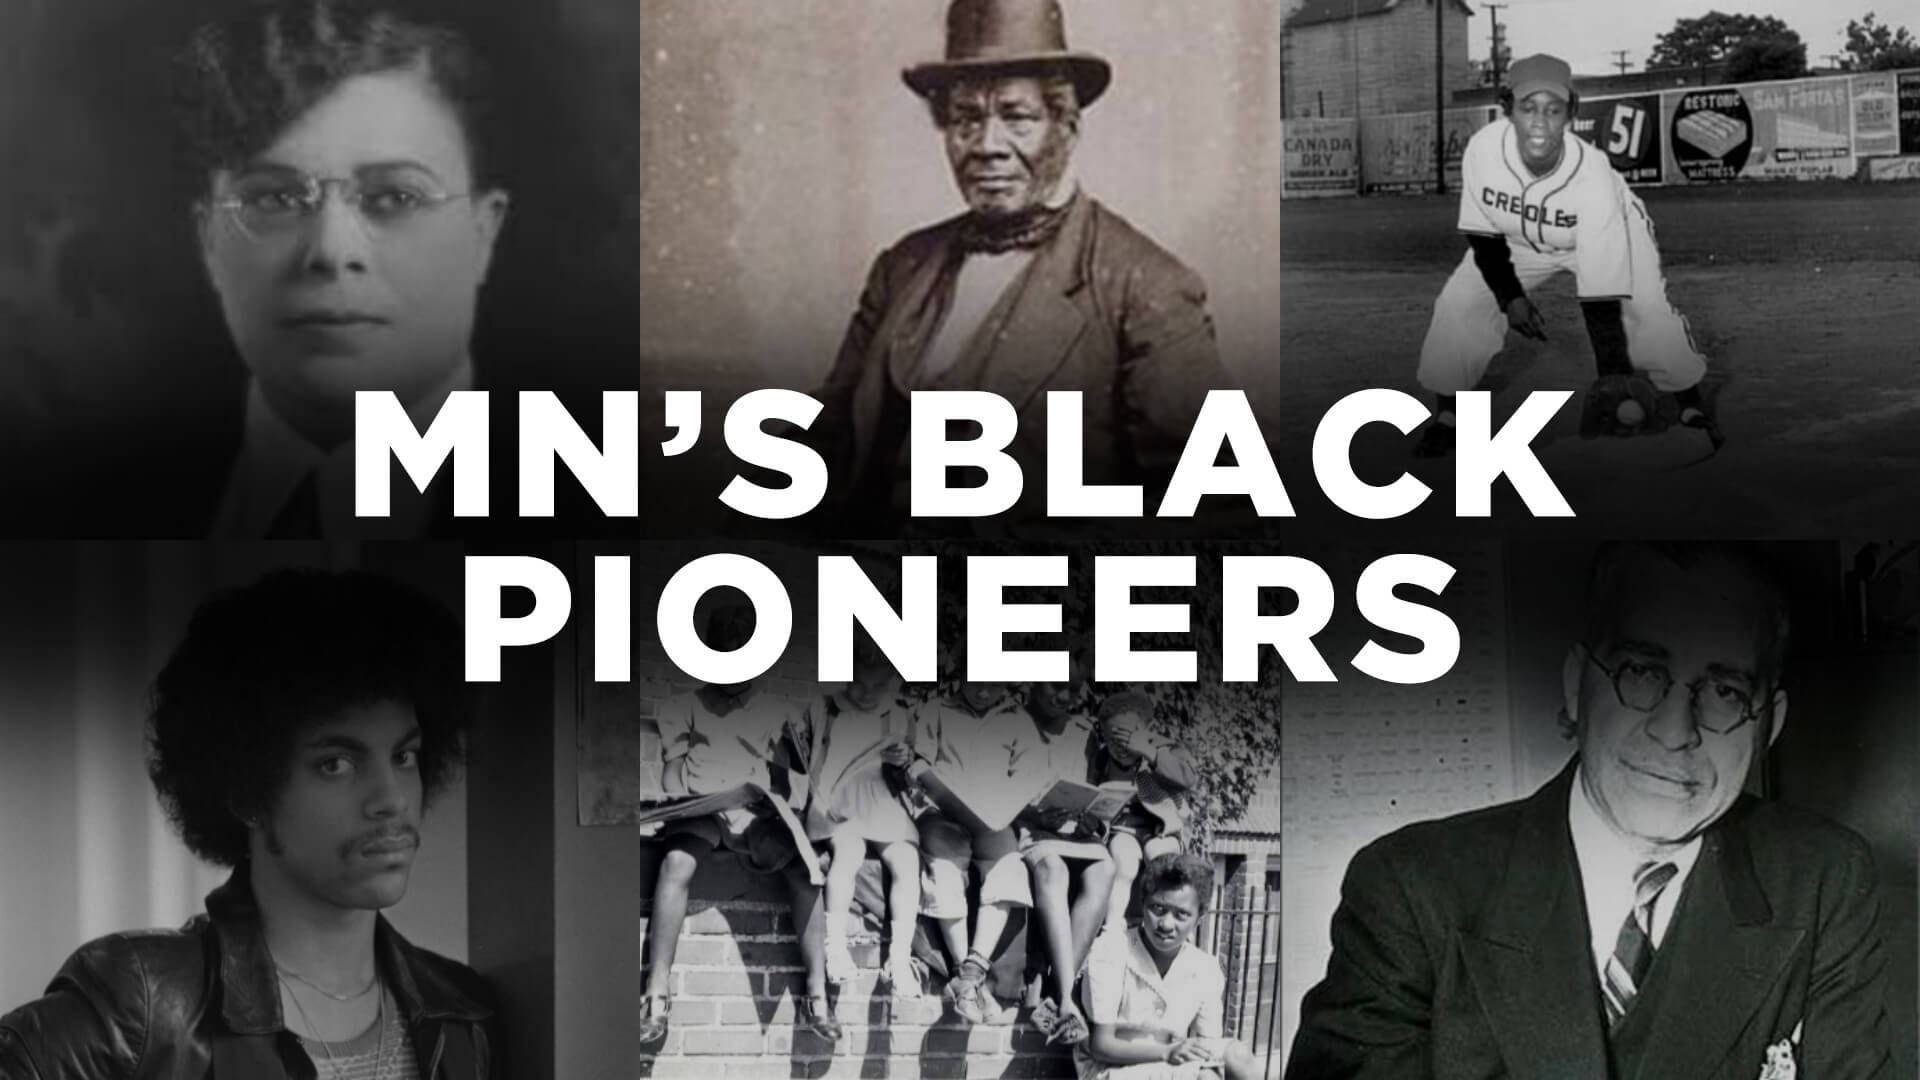 A compilation of images that includes photos of Minnesota's Black Pioneers, men and women who have forever shaped what it means to live here.  The title "Minnesota's Black Pioneers" is overlaid on the images. 